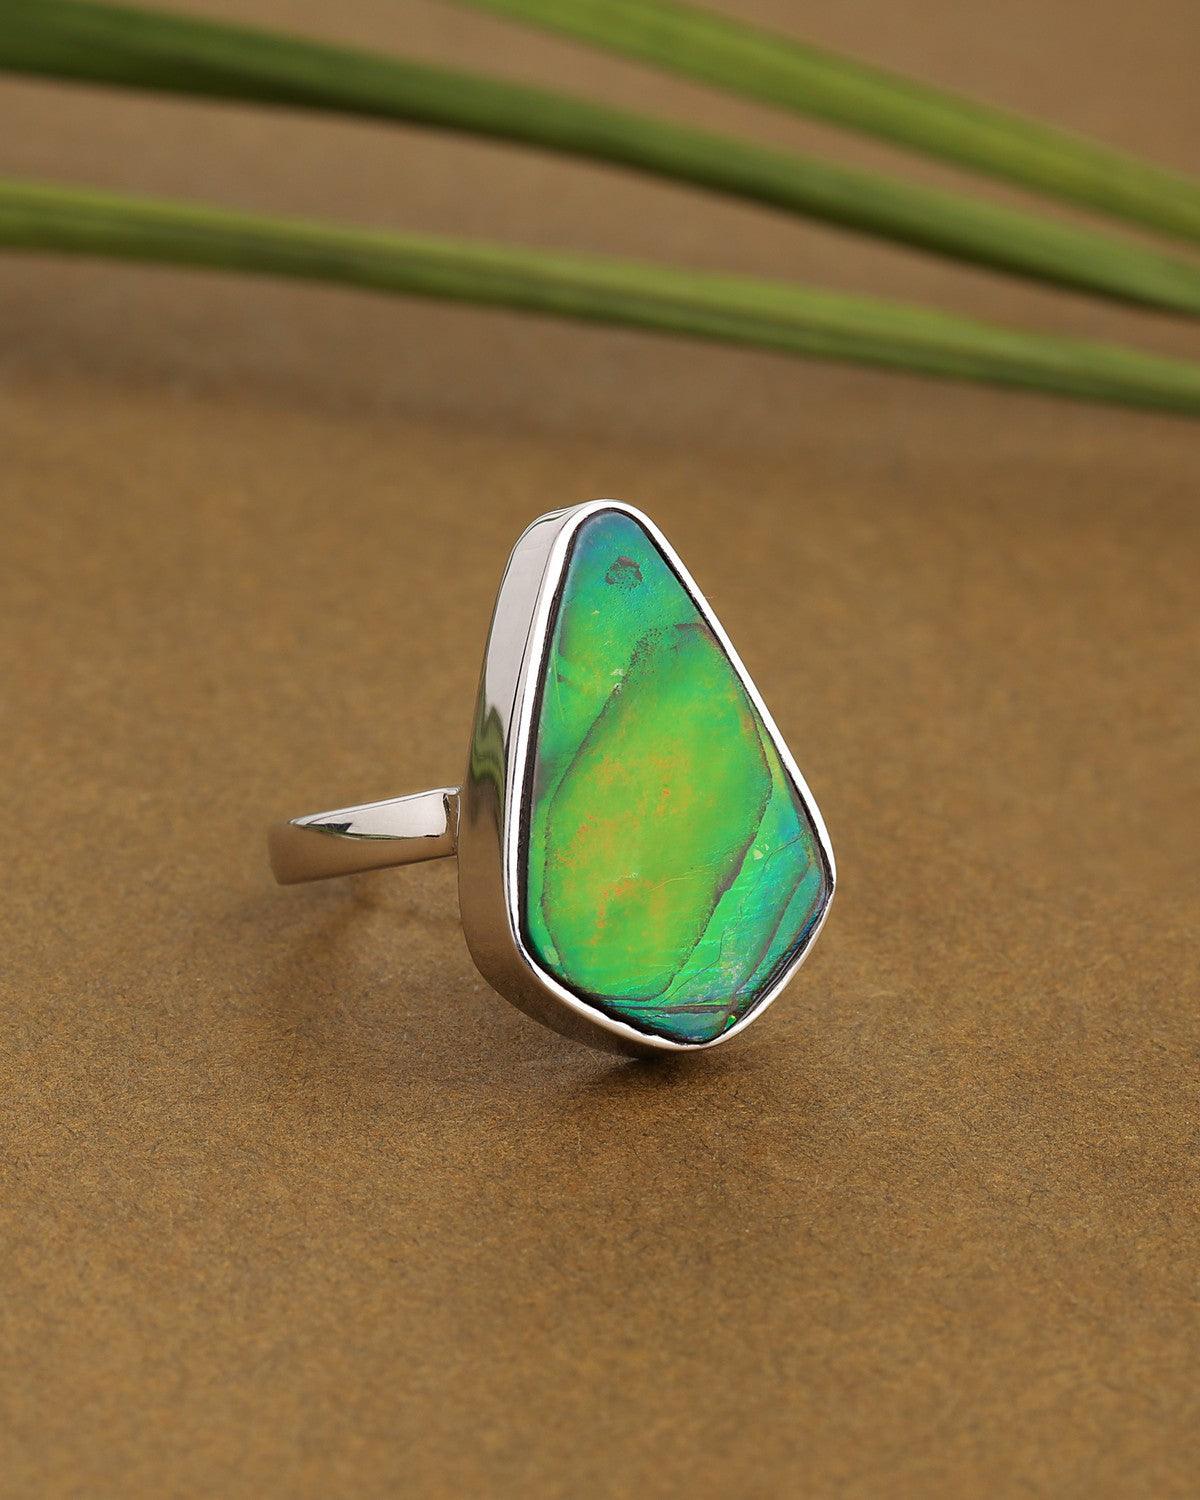 11 Ct. Ammolite Solid 925 Sterling Silver Statement Ring Jewelry - YoTreasure